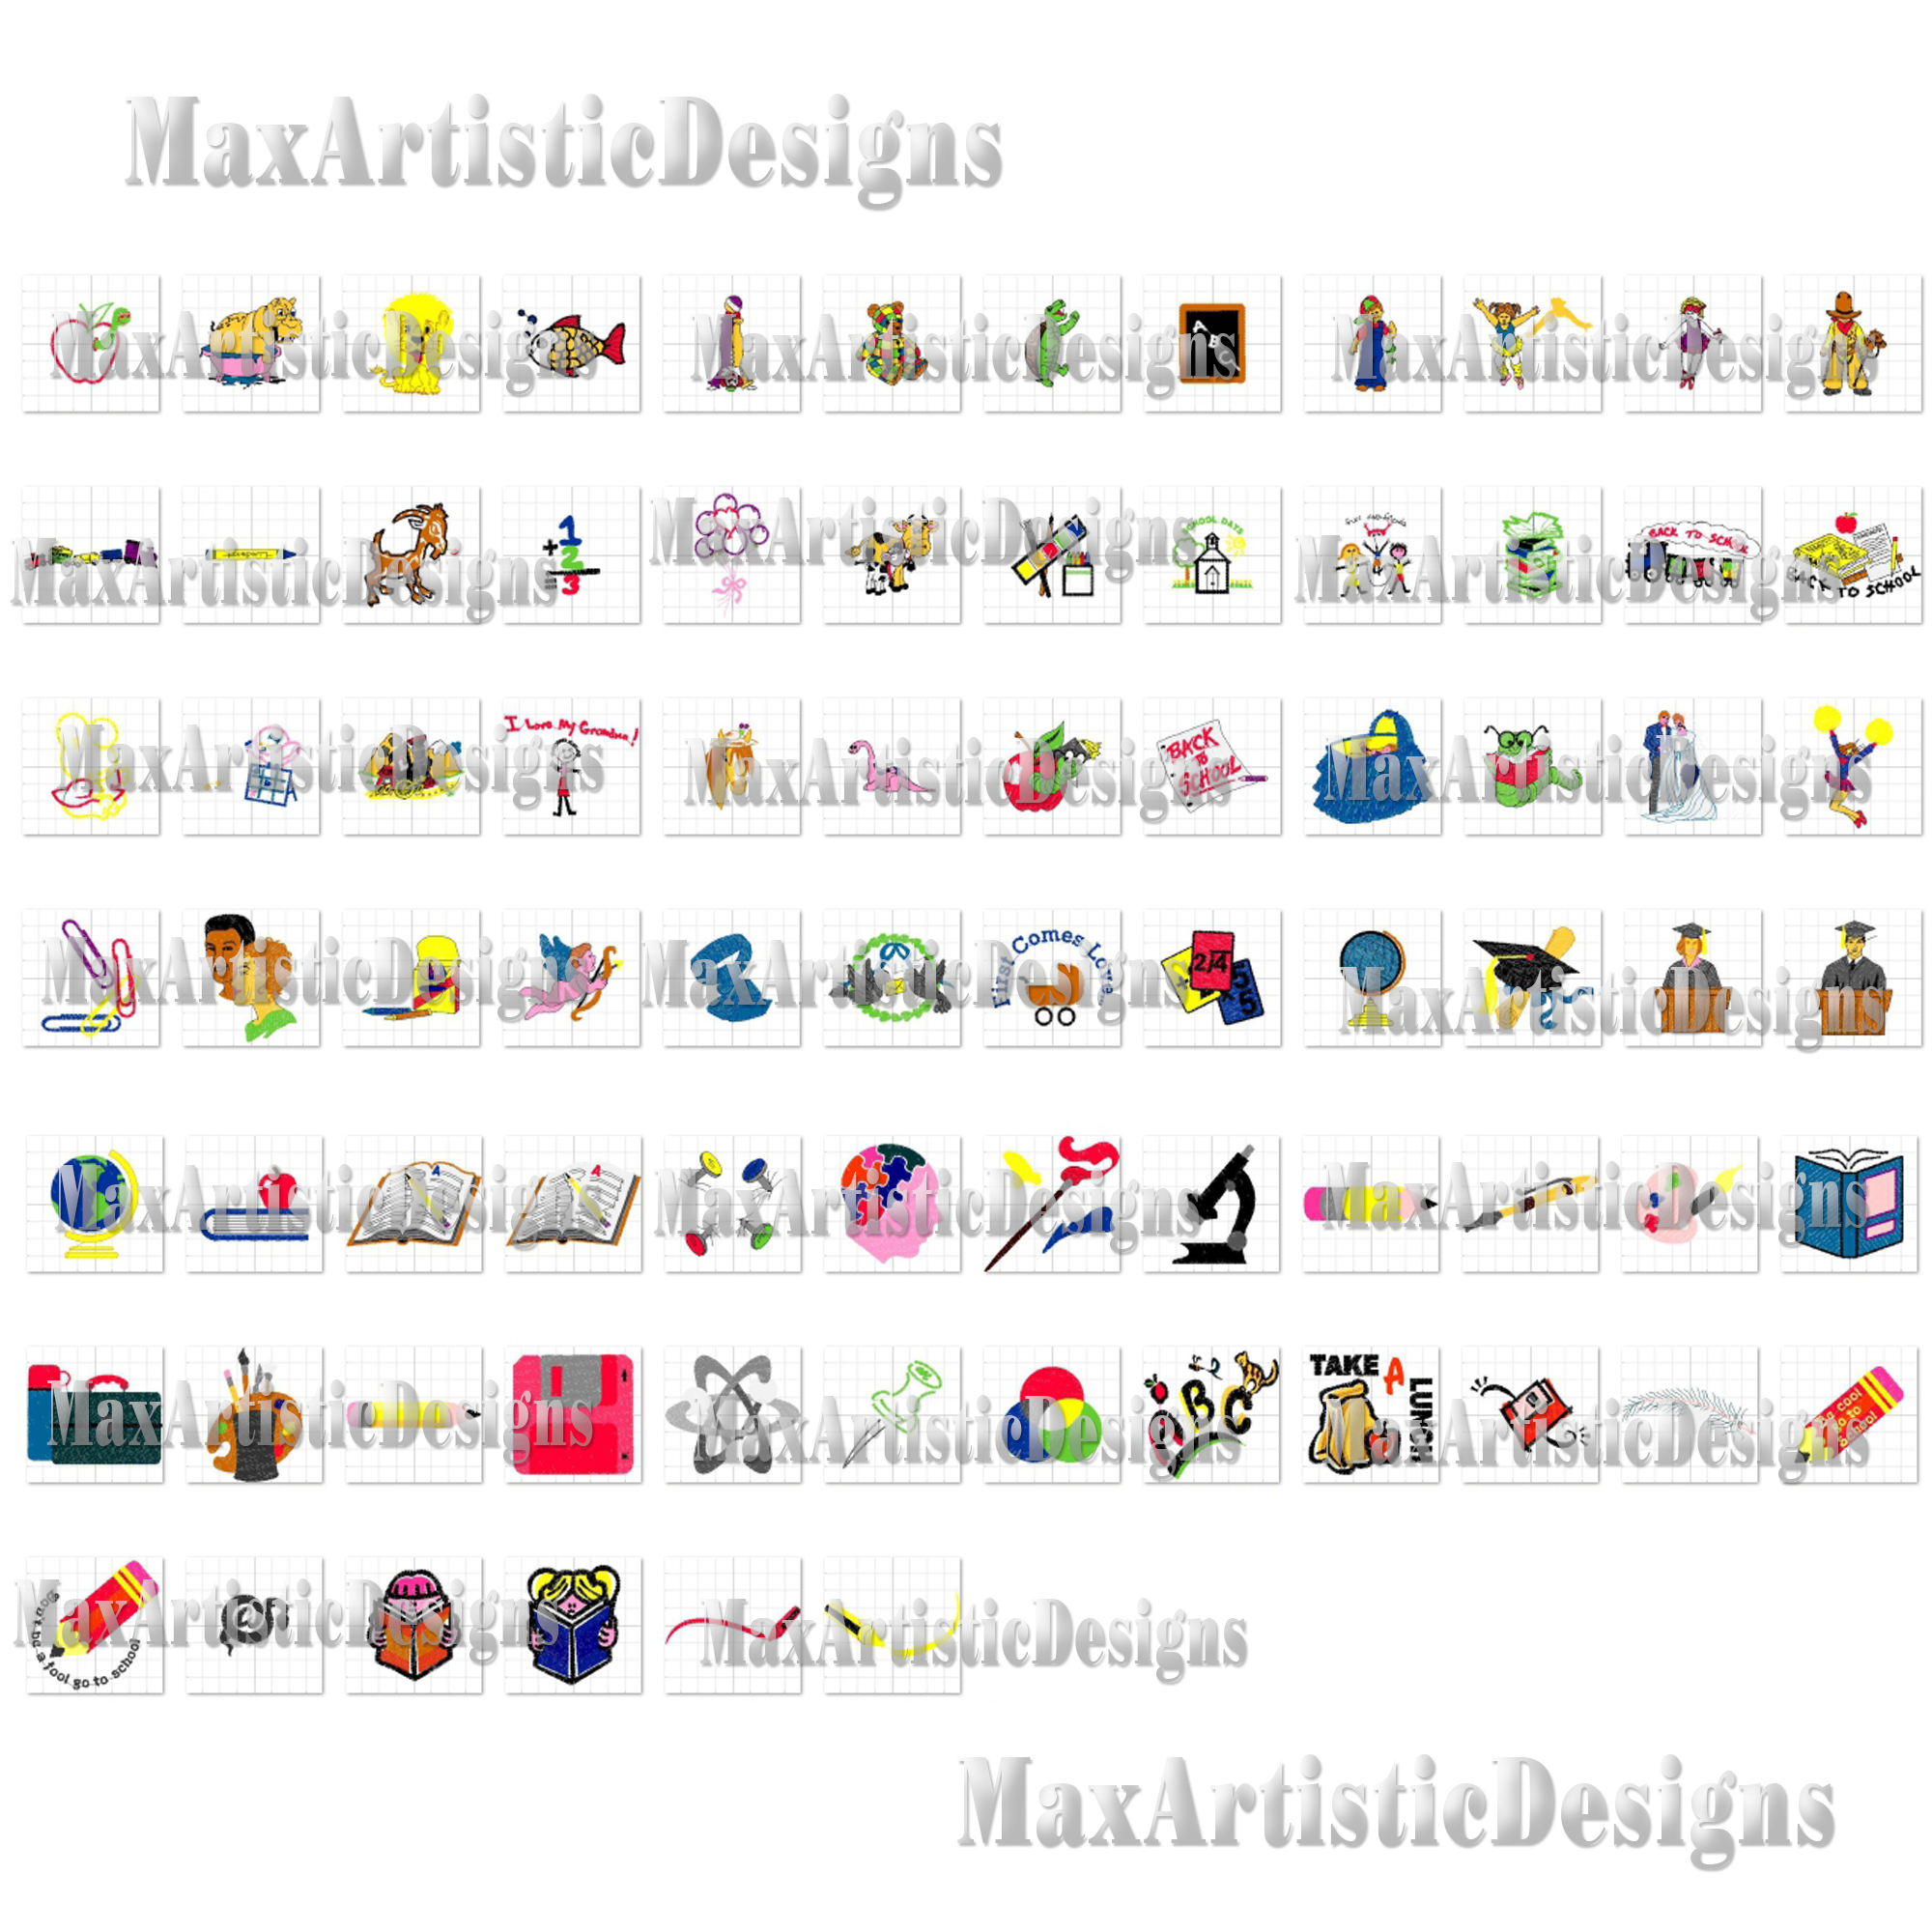 170+ School Days related embroidery designs Machine embroidery designs